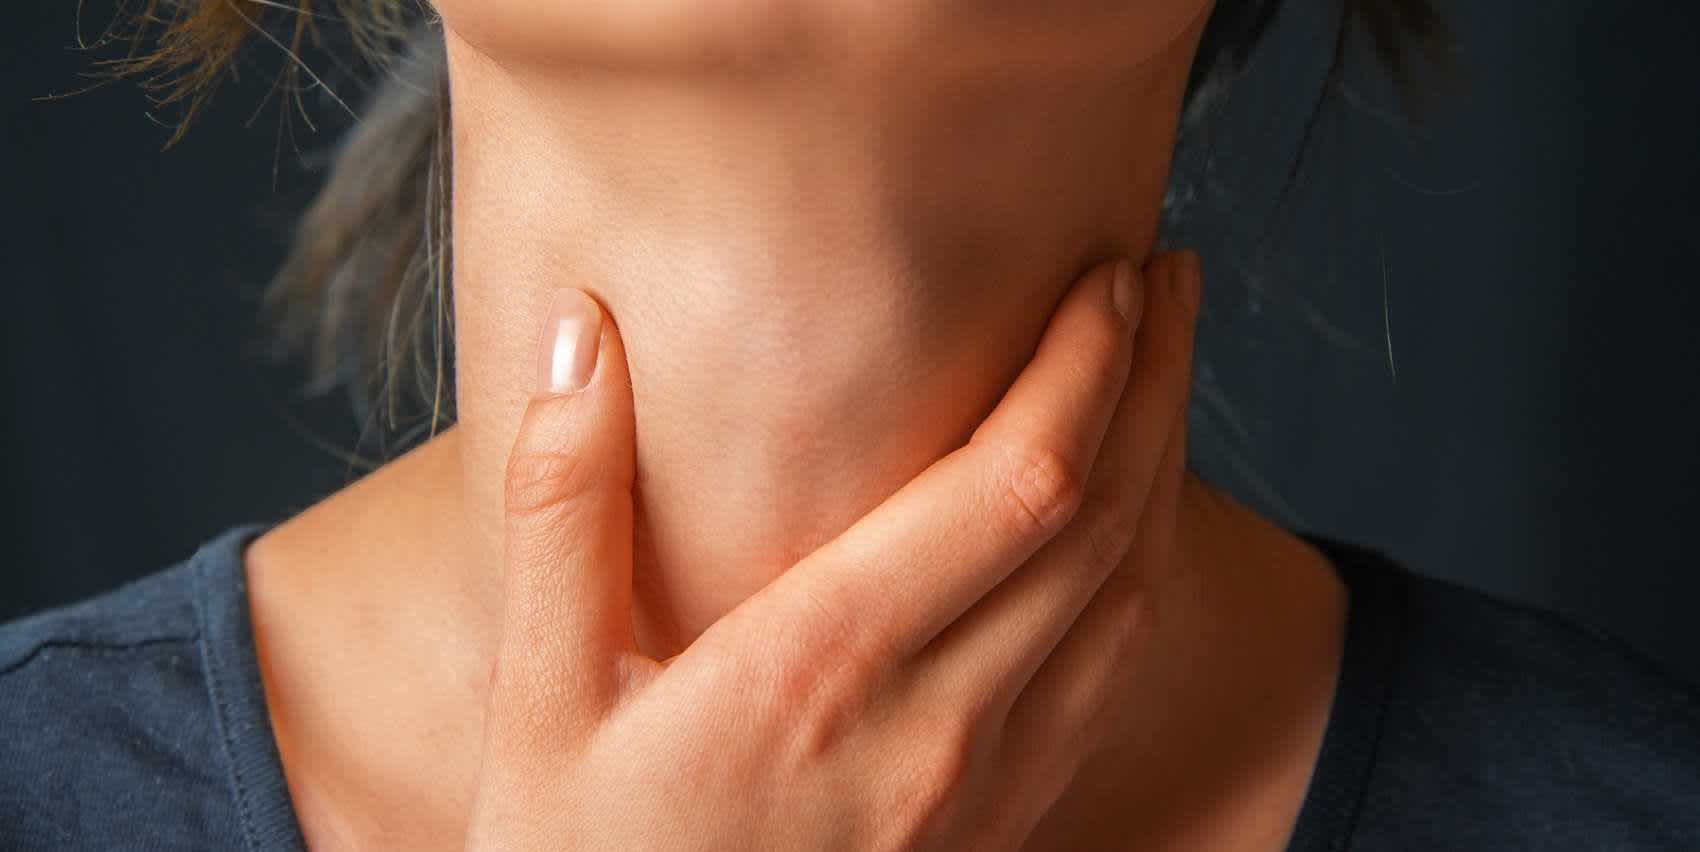 Woman cupping her neck with her hand while wondering about chlamydia in the throat